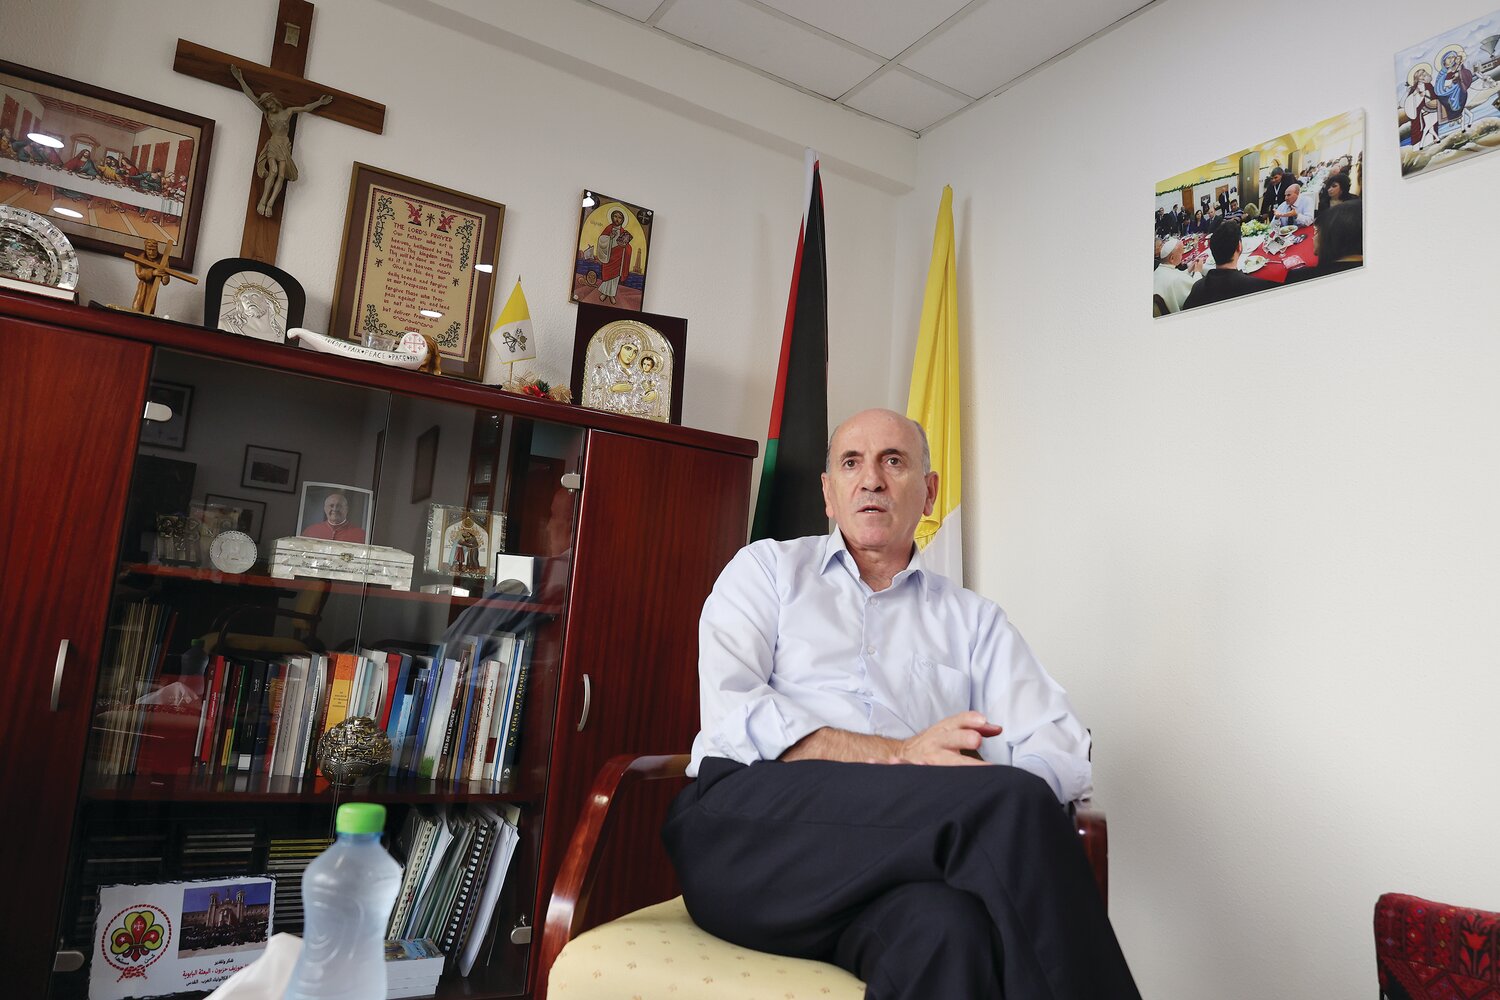 CNEWA Regional Director Joseph Hazboun sits for an interview with Rhode Island Catholic in the Jerusalem Field Office.